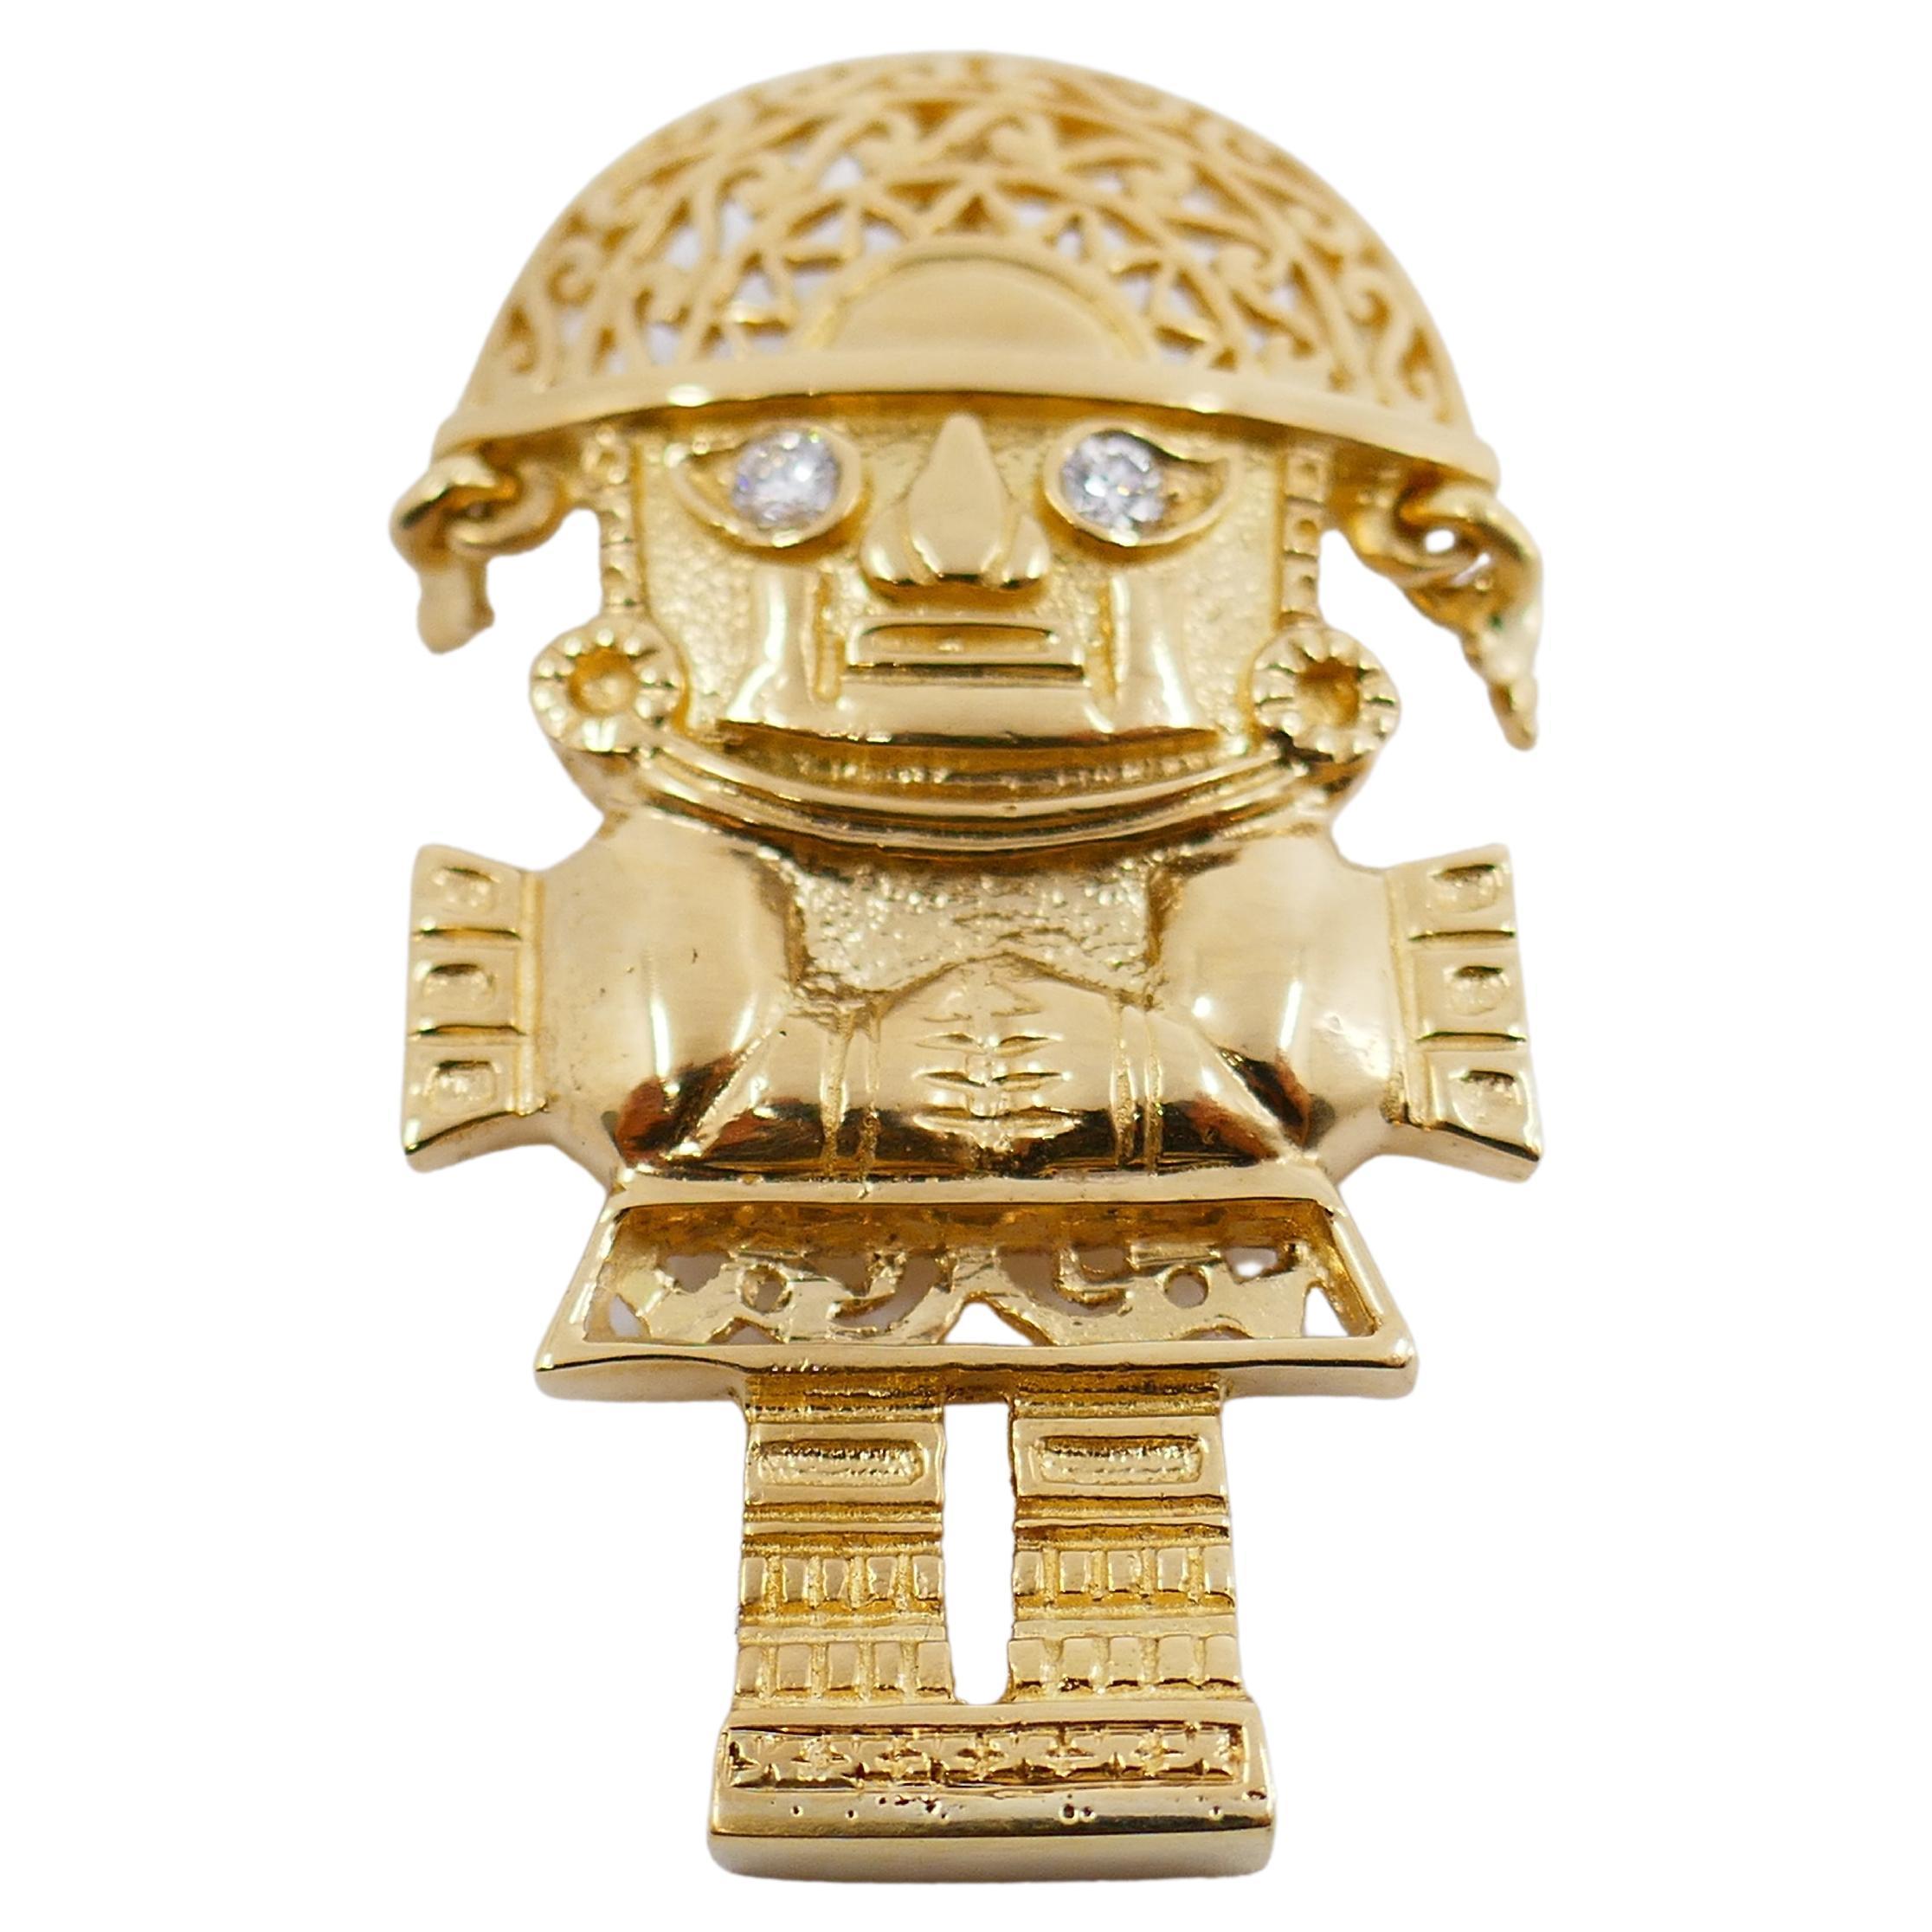 A cute and fun vintage pendant made of 18k gold, features diamond.
The pendant designed as a pirate figure wearing a hat. 
This vintage piece was meticulously crafted by using various goldsmith technics. The hat and part of the clothing is